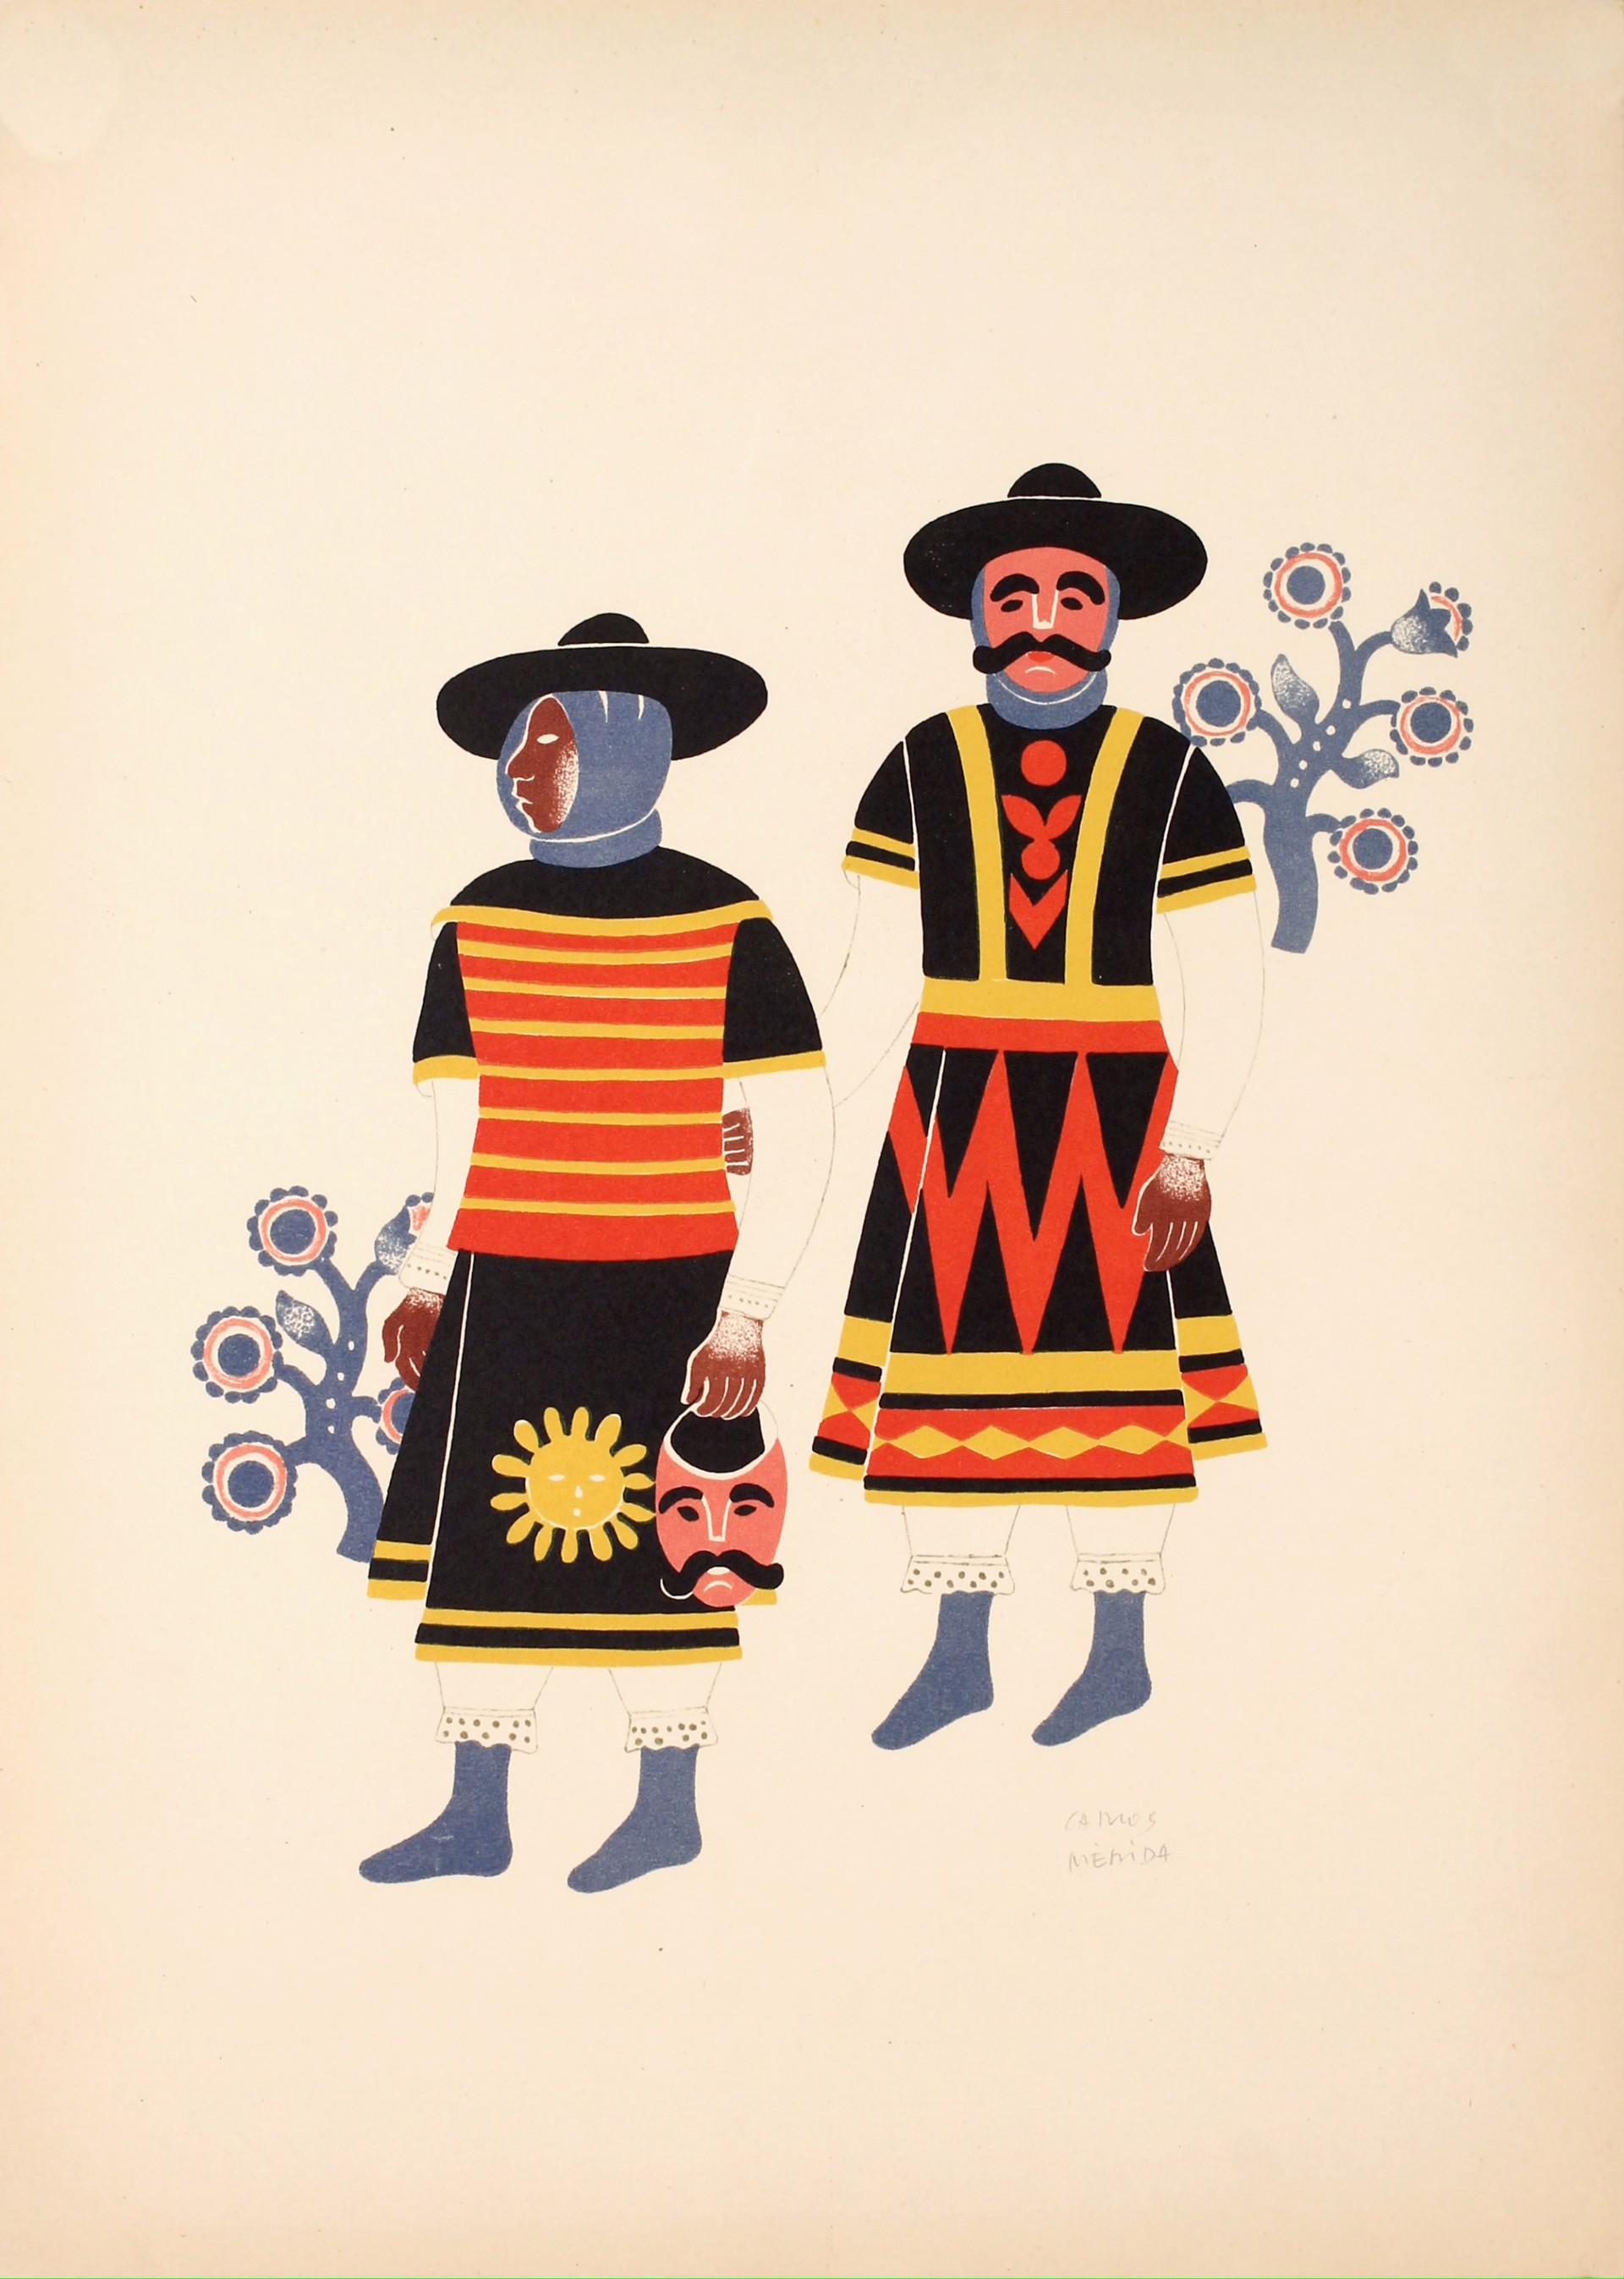 Two Men From Huixquilucan at the Fiesta of the Huehuenches by Carlos Mérida